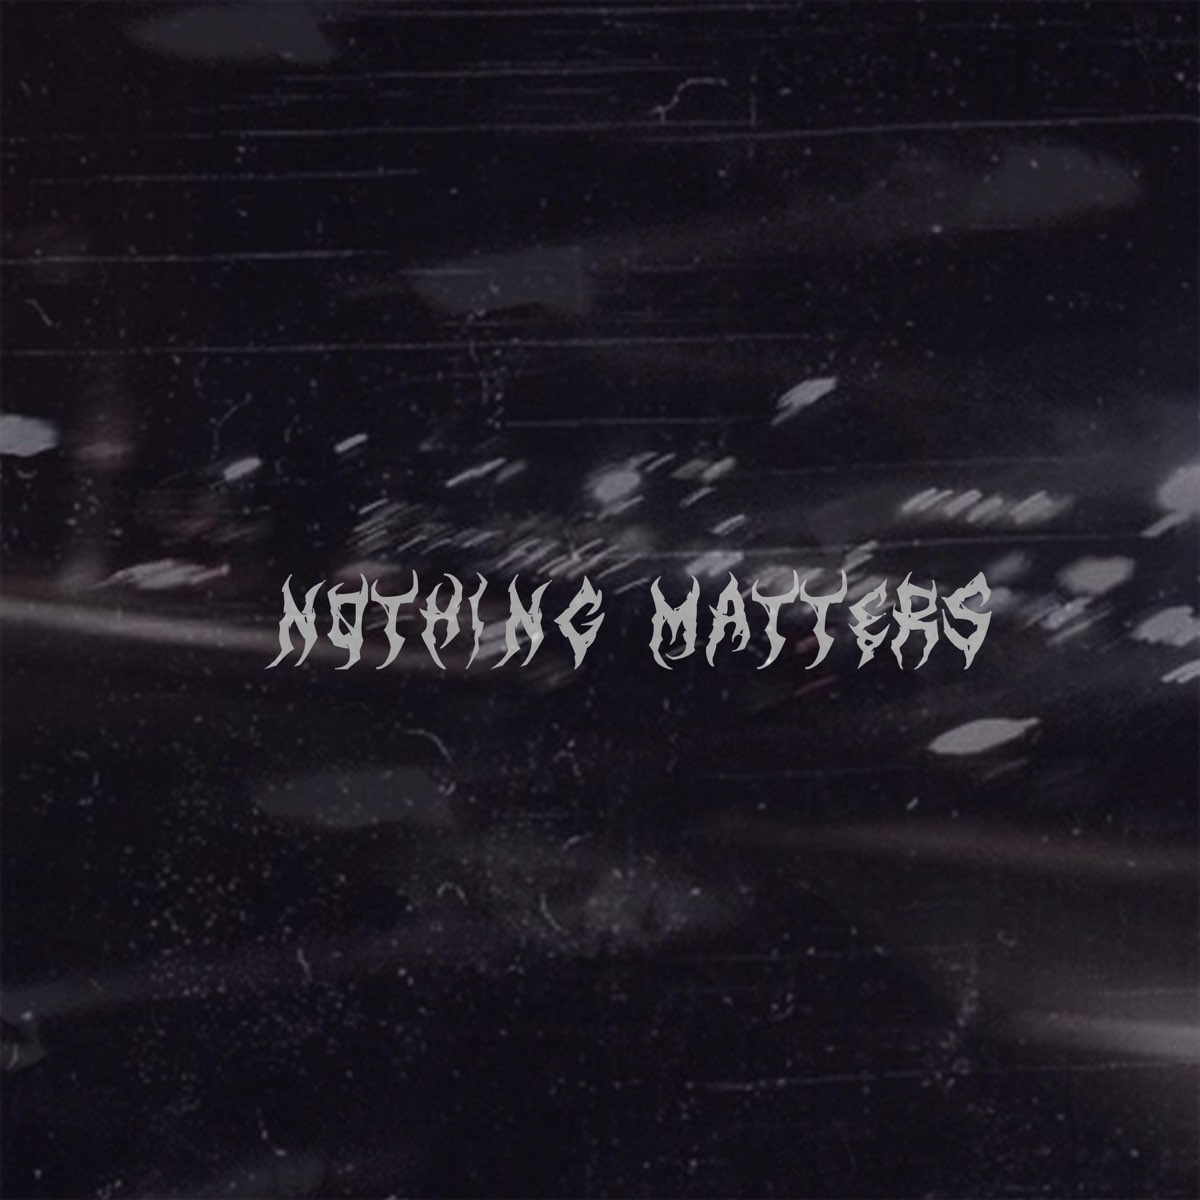 Nothing matters the last